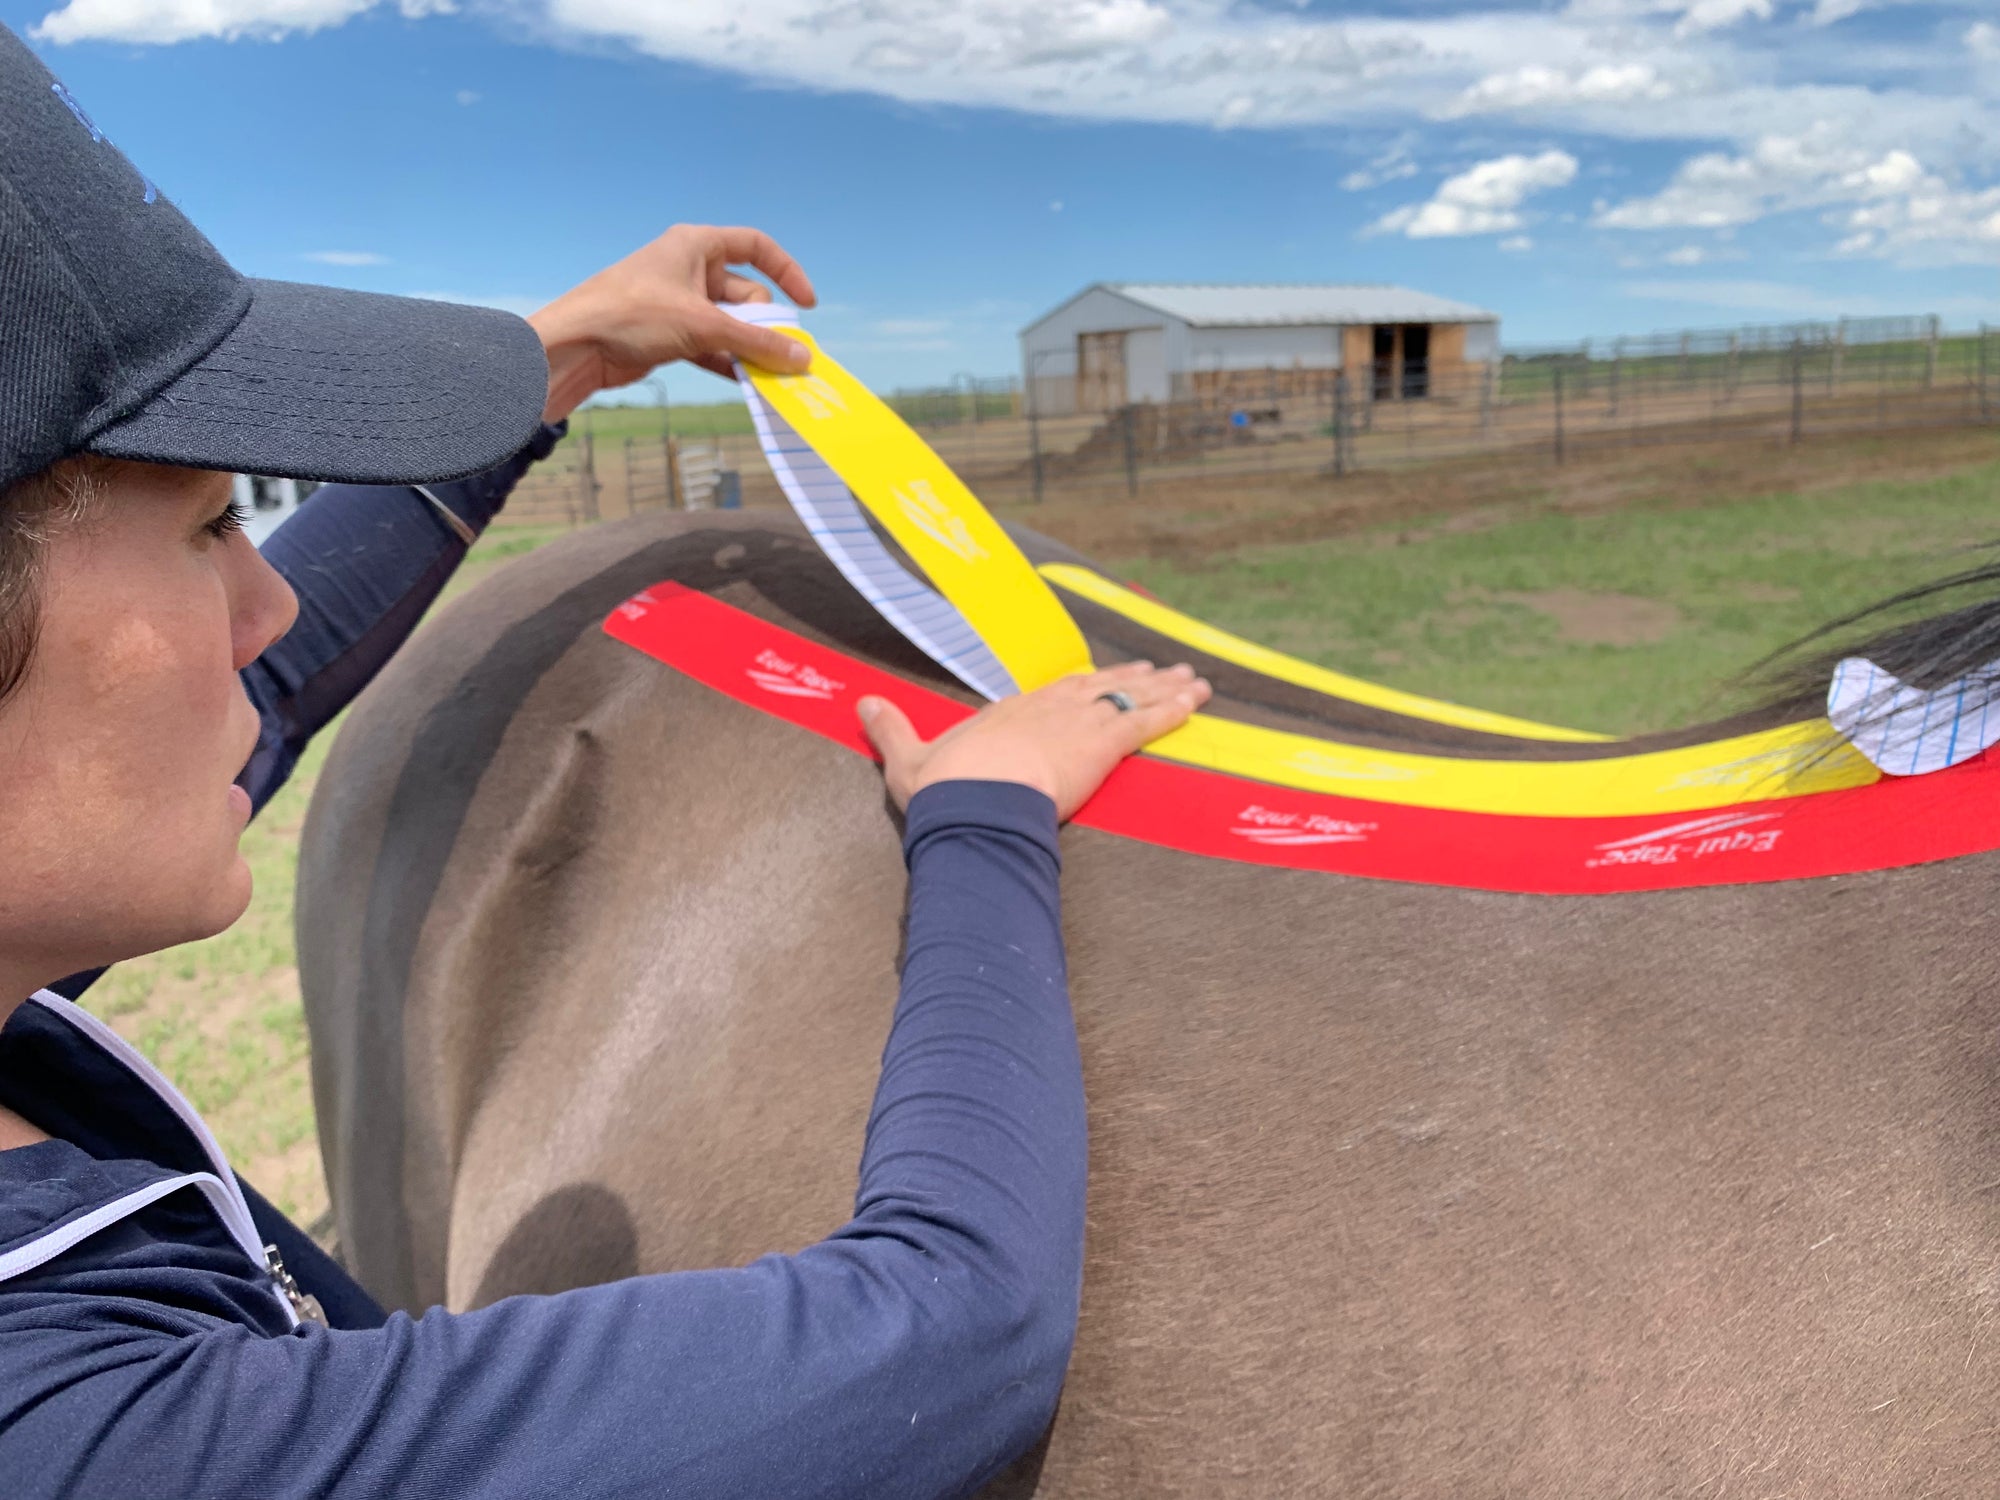 Get started Equi-Taping with our monthly subscription course, The Practical Solutions Series. The Practical Solutions Series demonstrates simple yet effective applications for using equine elastic kinesiology tape every day.